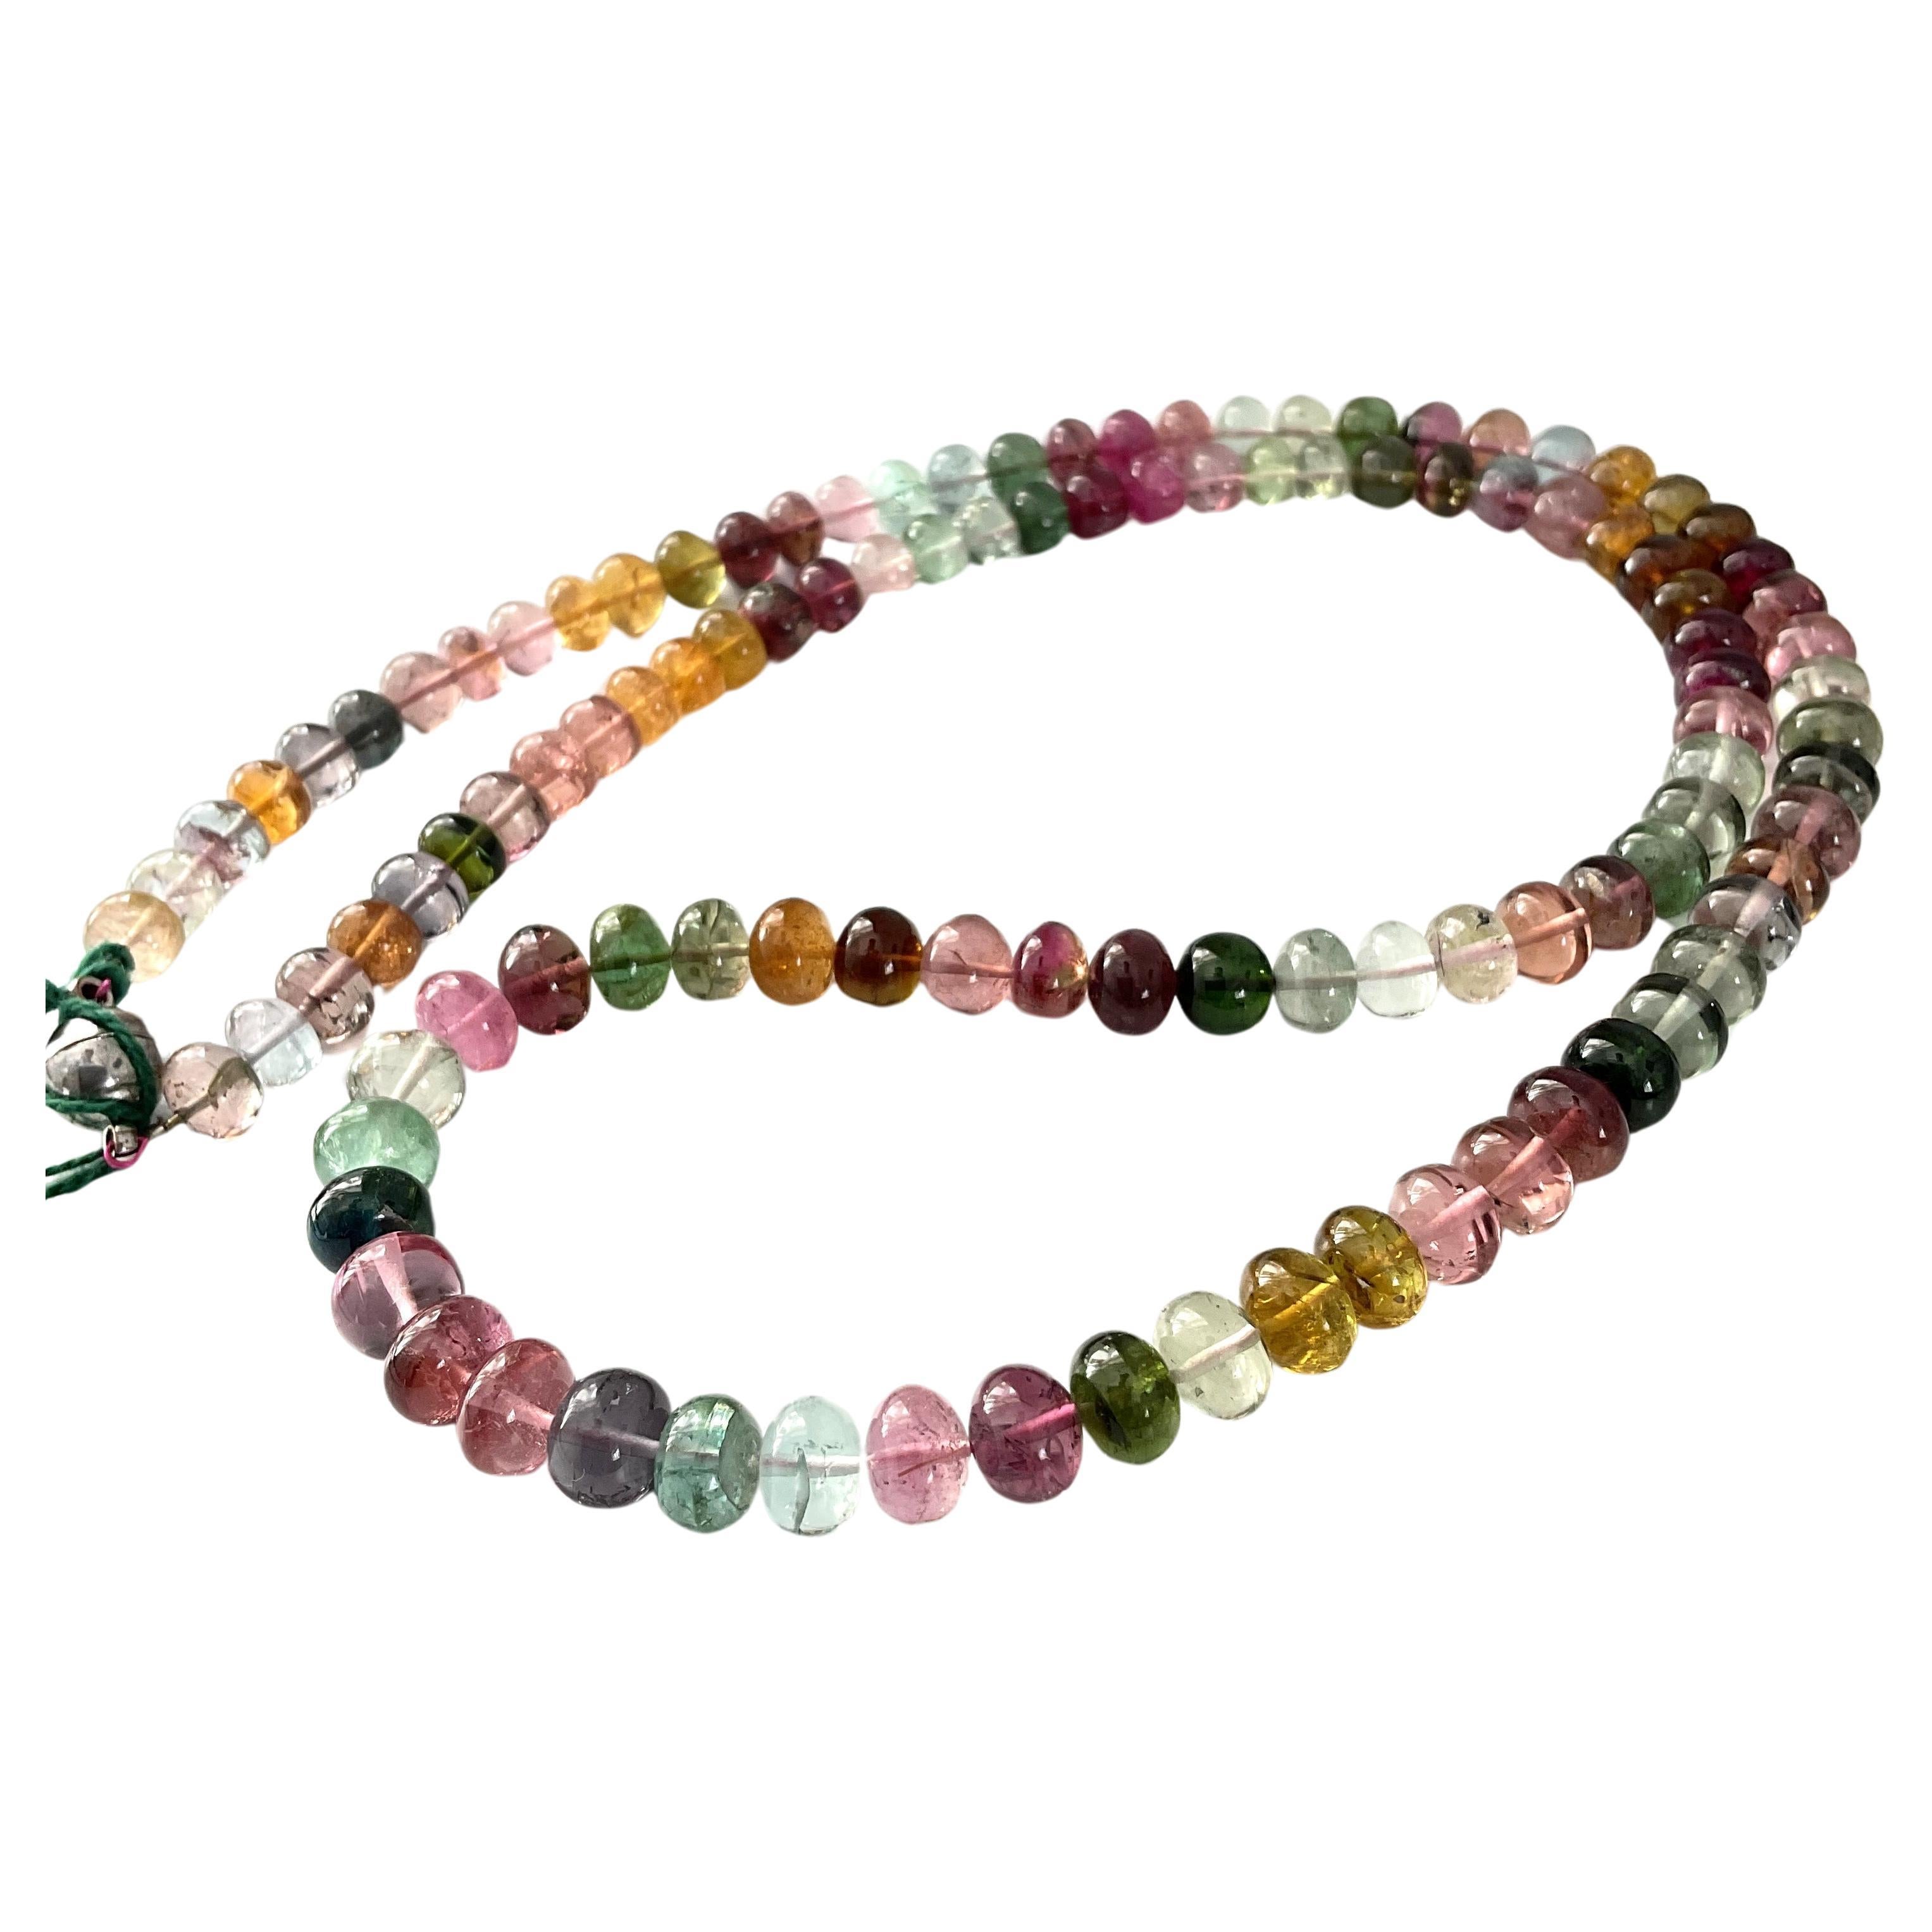 265.70 Carats Multi Tourmaline Beaded Necklace For Fine Jewelry Natural Gemstone